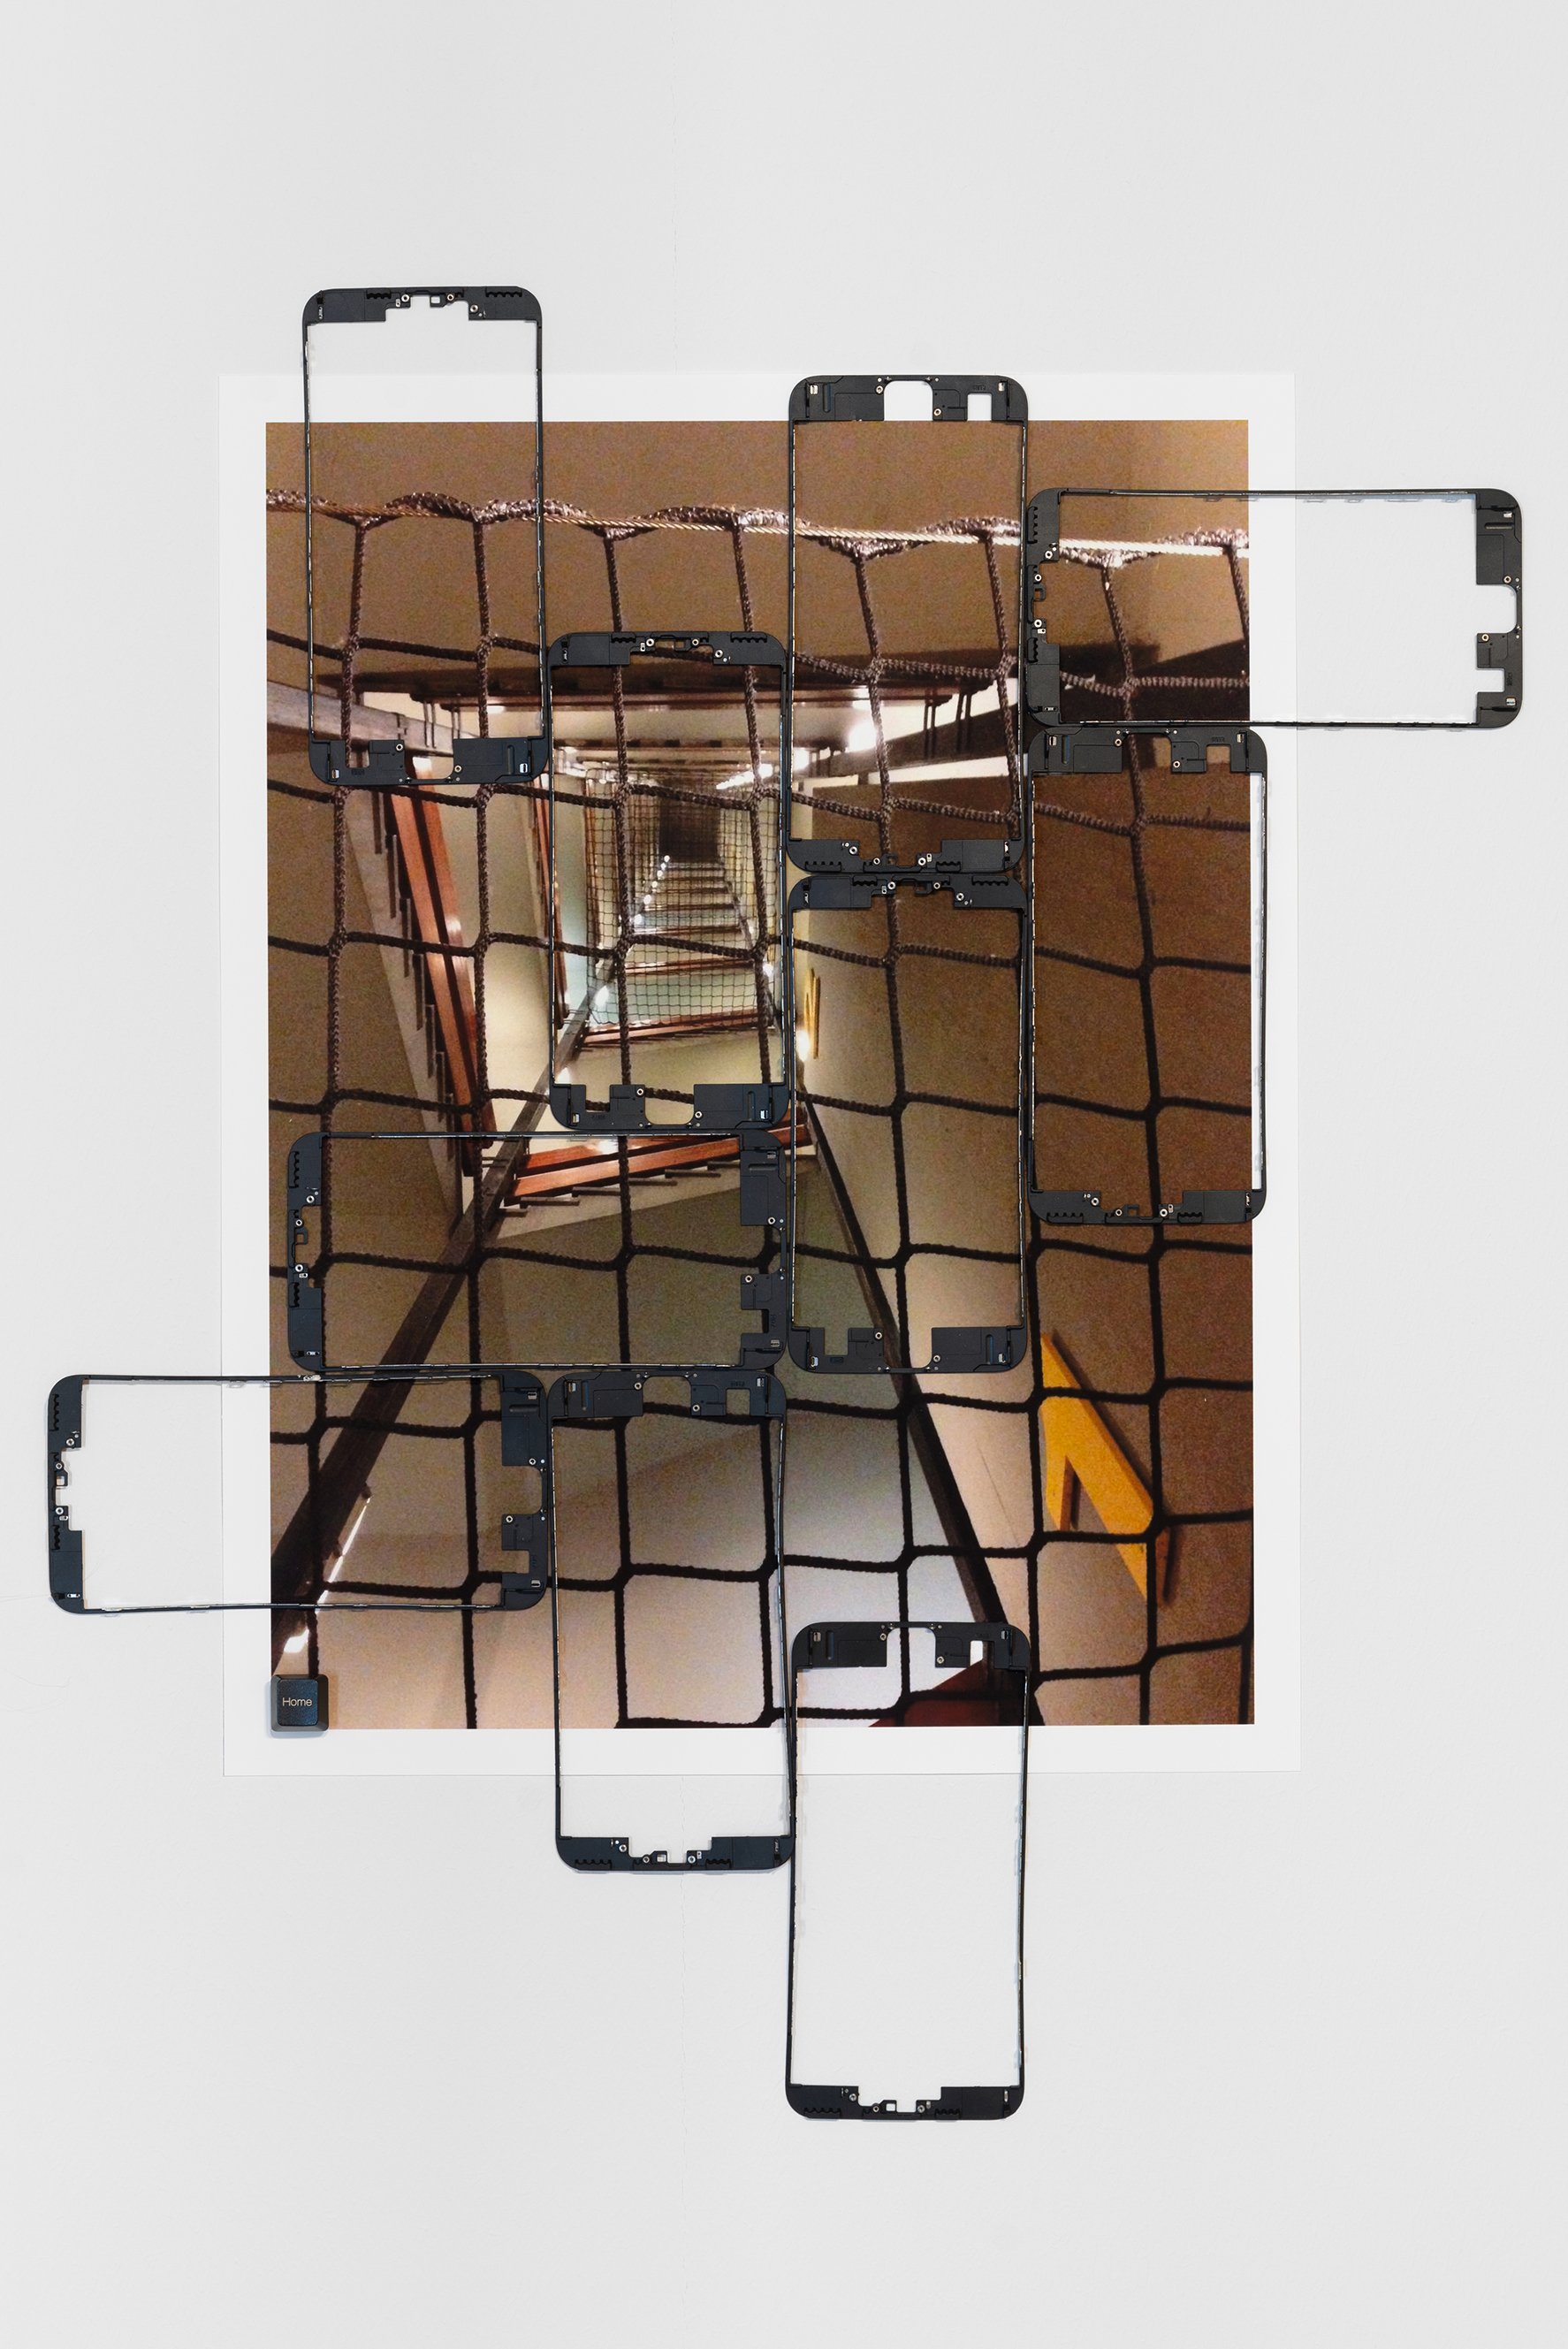   Maryam Jafri   Home (No Lithium, No Work)  edition of 3 + 2 AP 2023 Archival inkjet prints, smartphone bezels, key cap 13¼ x 17¼ in. &nbsp; 33.66 x 43.81 cm MJ0143  Photo of anti-suicide nets installed inside workers dorms by Apple-supplier Foxconn